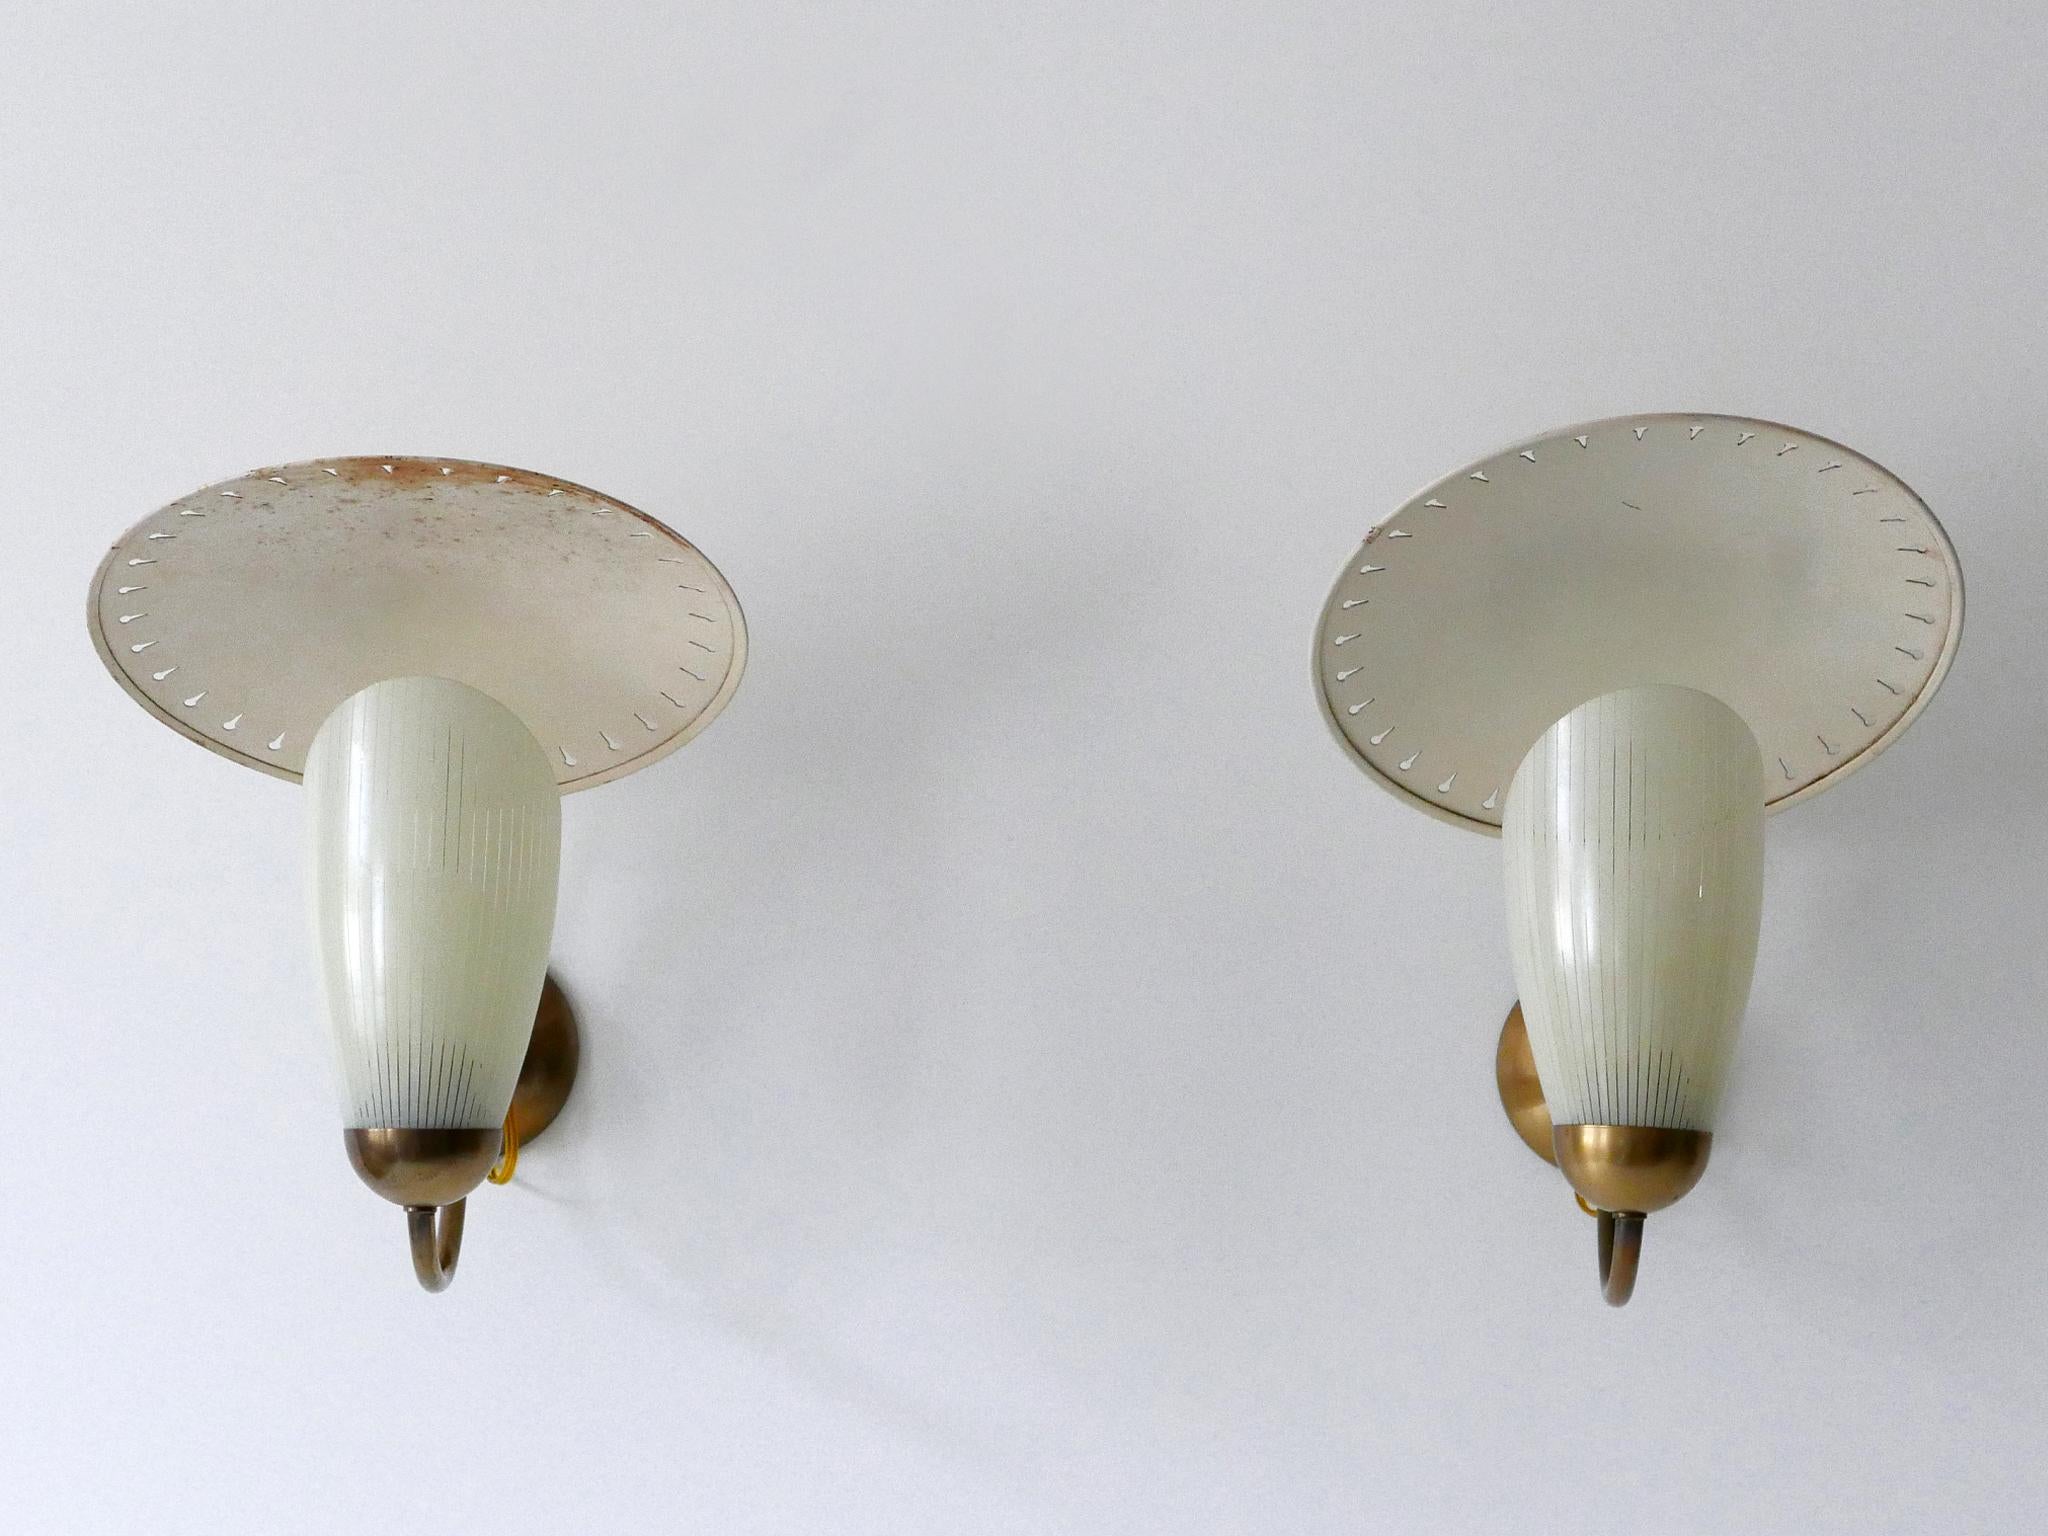 Brass Set of Two Rare Mid-Century Modern Sputnik Sconces or Wall Lights Germany 1950s For Sale